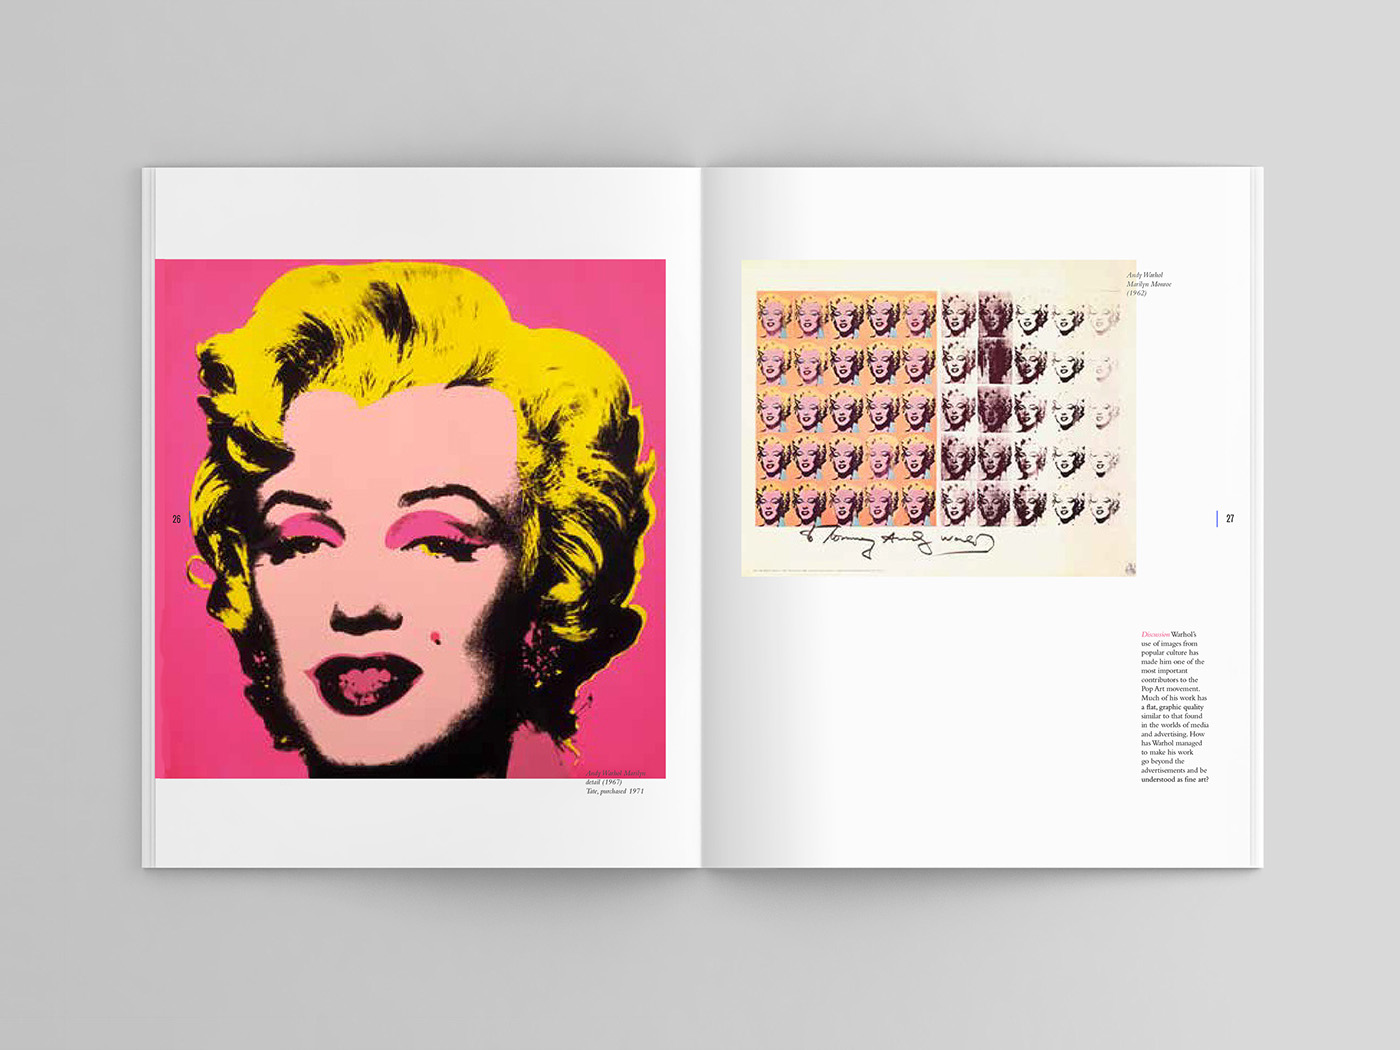 Andy Warhol art book personal project book design Layout